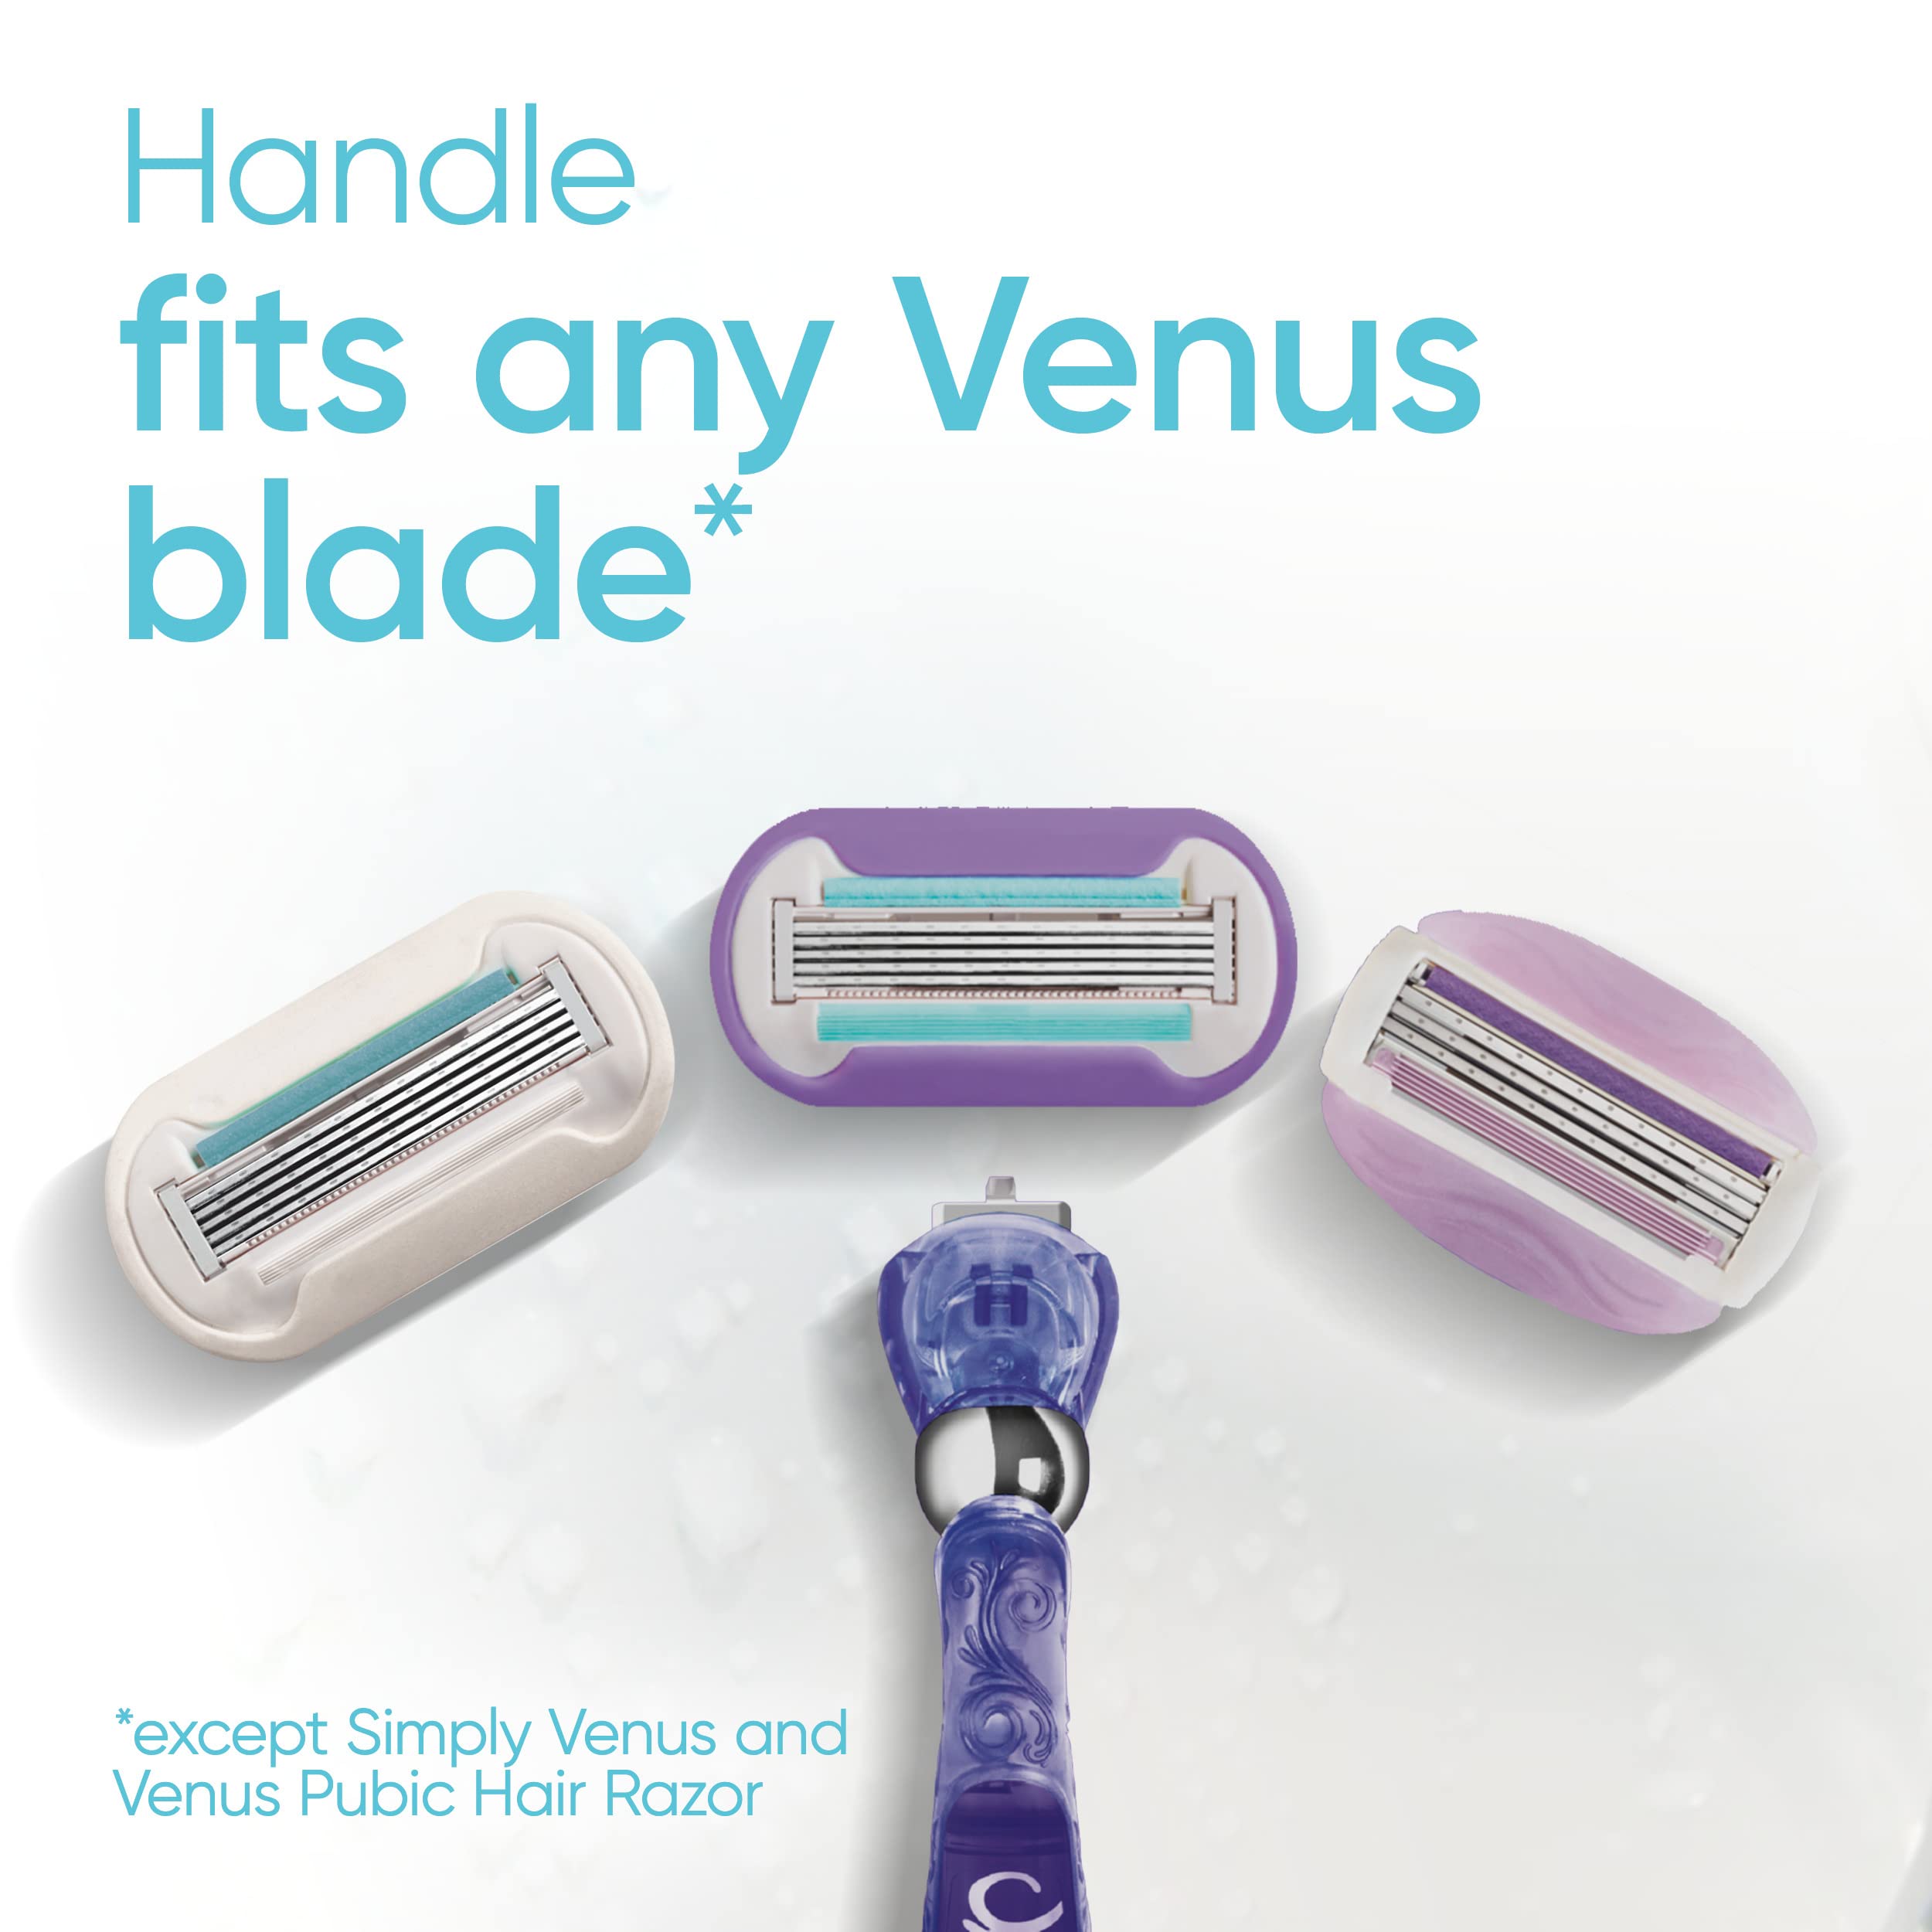 Gillette Venus Deluxe Smooth Swirl Womens Razor Blade Refills, 6 Count, Moisture Ribbon to Protect Against Irritation (Pack of 1)